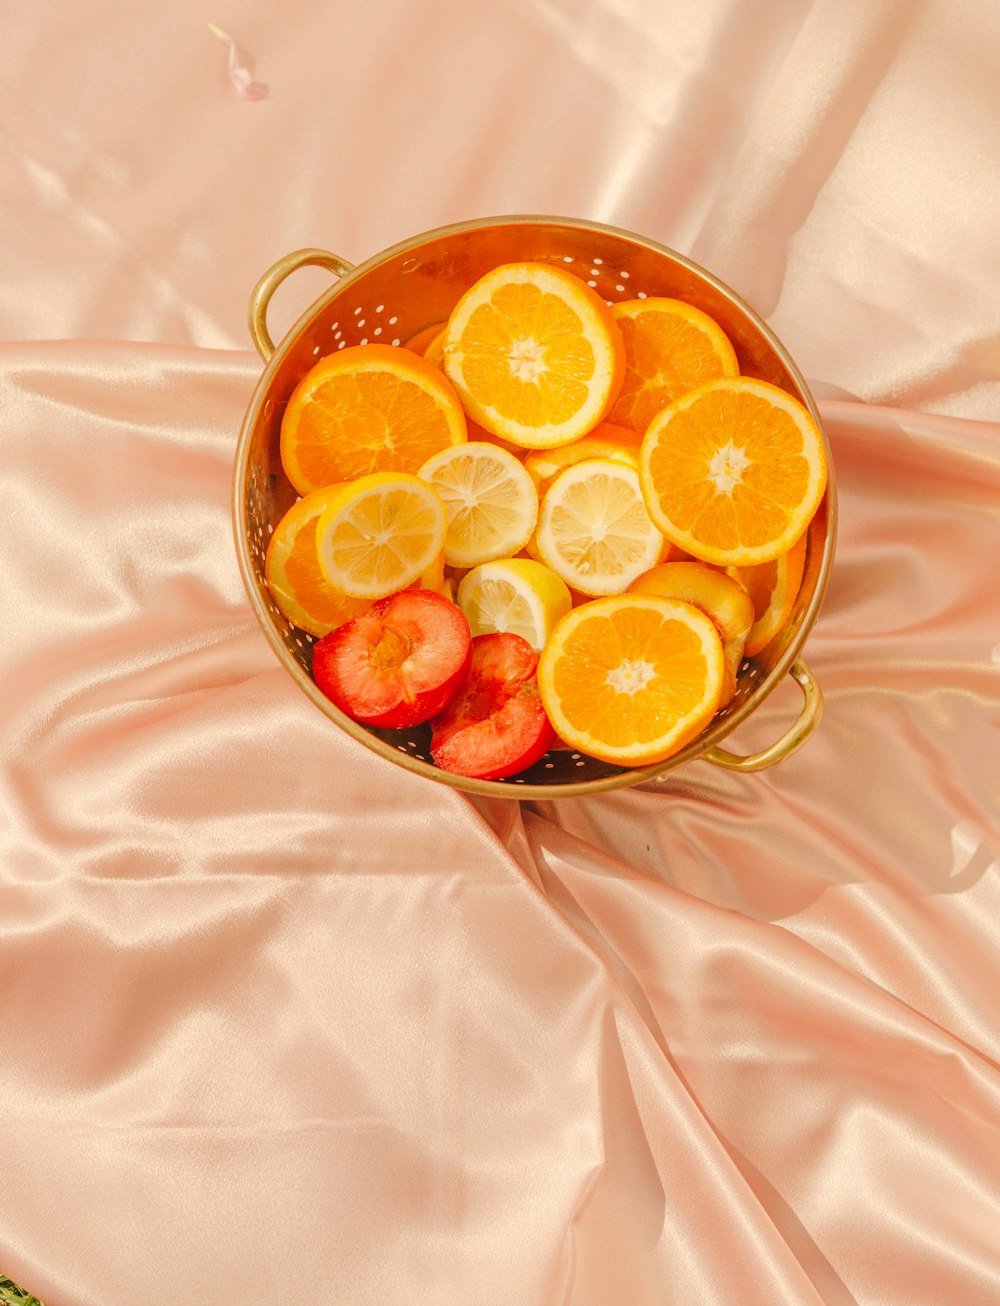 a bowl of sliced oranges and strawberries on a pink satin